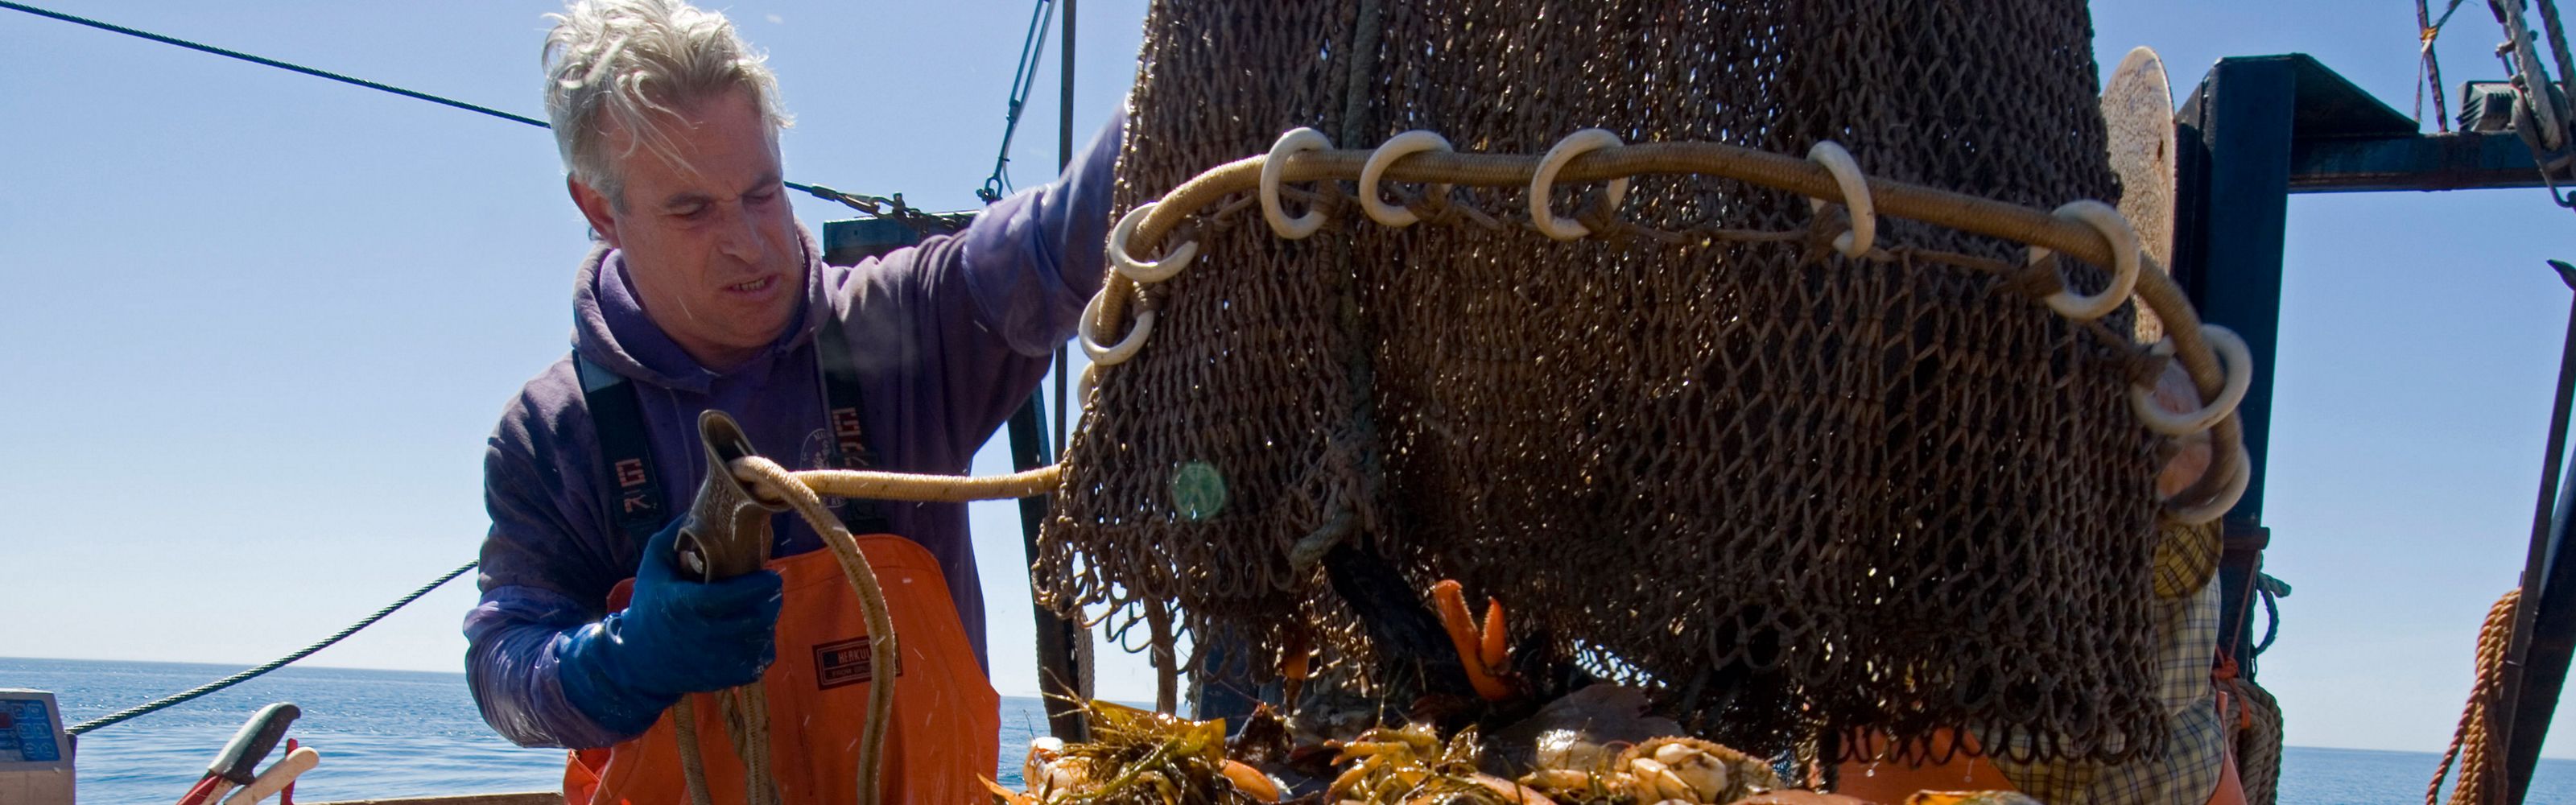 A fisherman checks his haul in the Gulf of Maine.